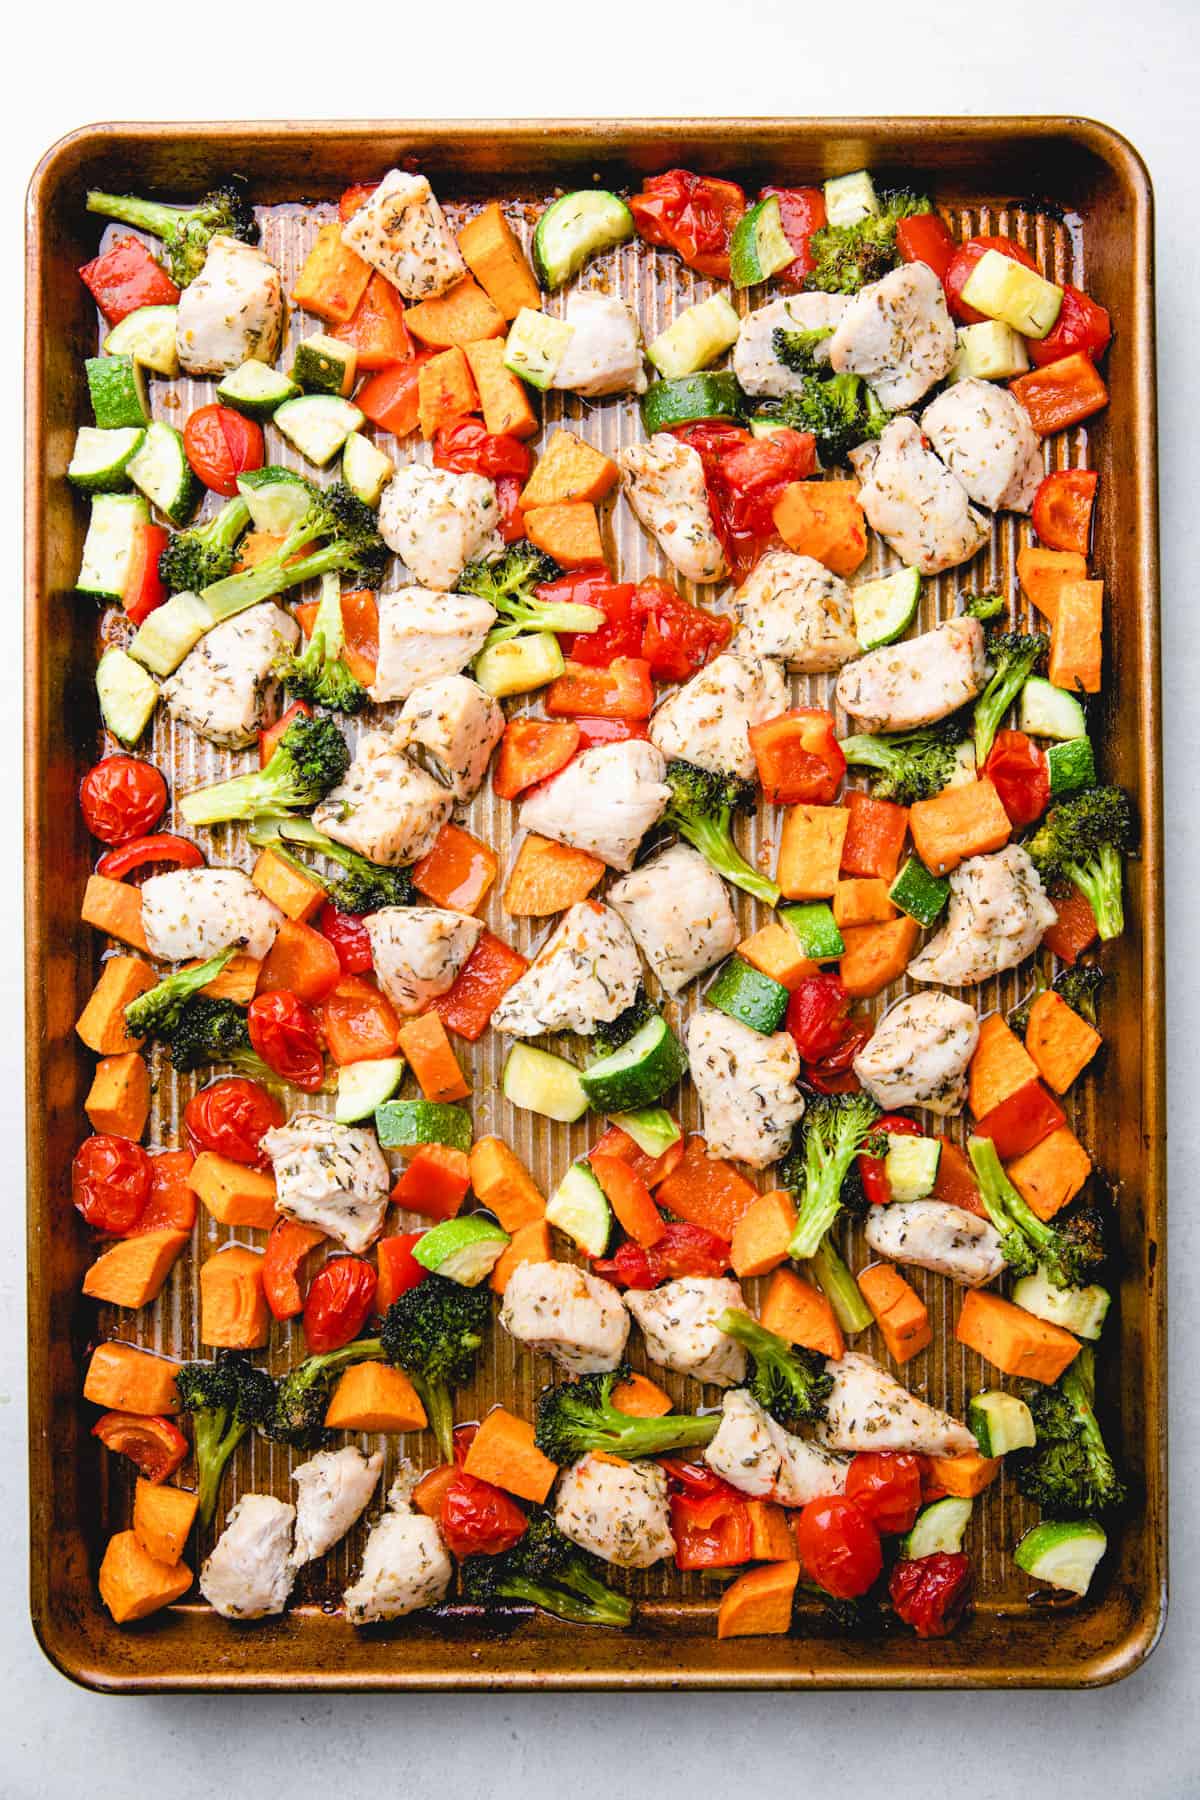 Baked diced chicken breast, sweet potatoes, broccoli, zucchini, bell pepper, and cherry tomatoes on a baking sheet.